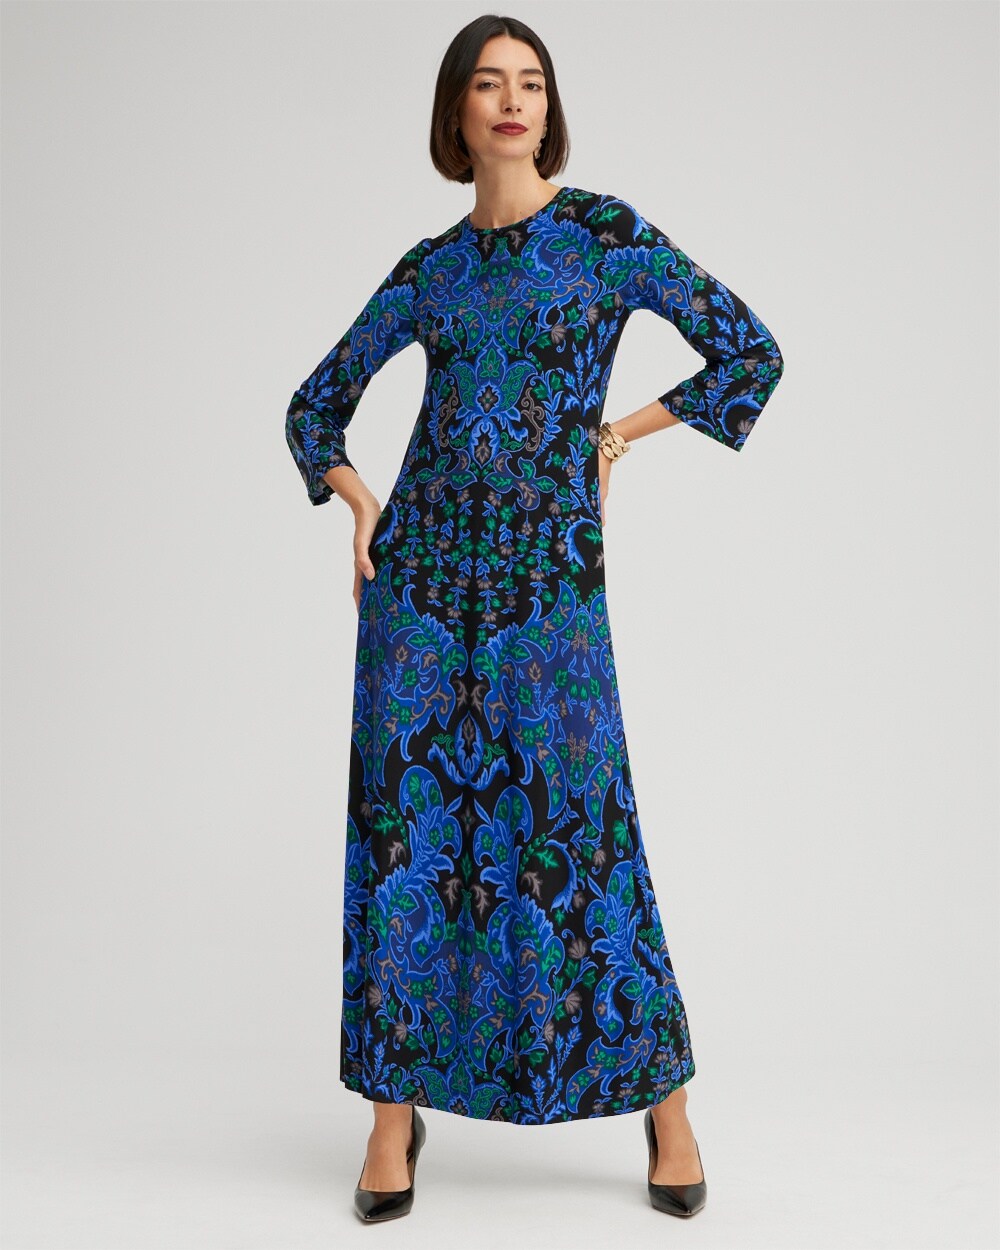 Petite Medallion Flare Sleeve Maxi Dress video preview image, click to start video